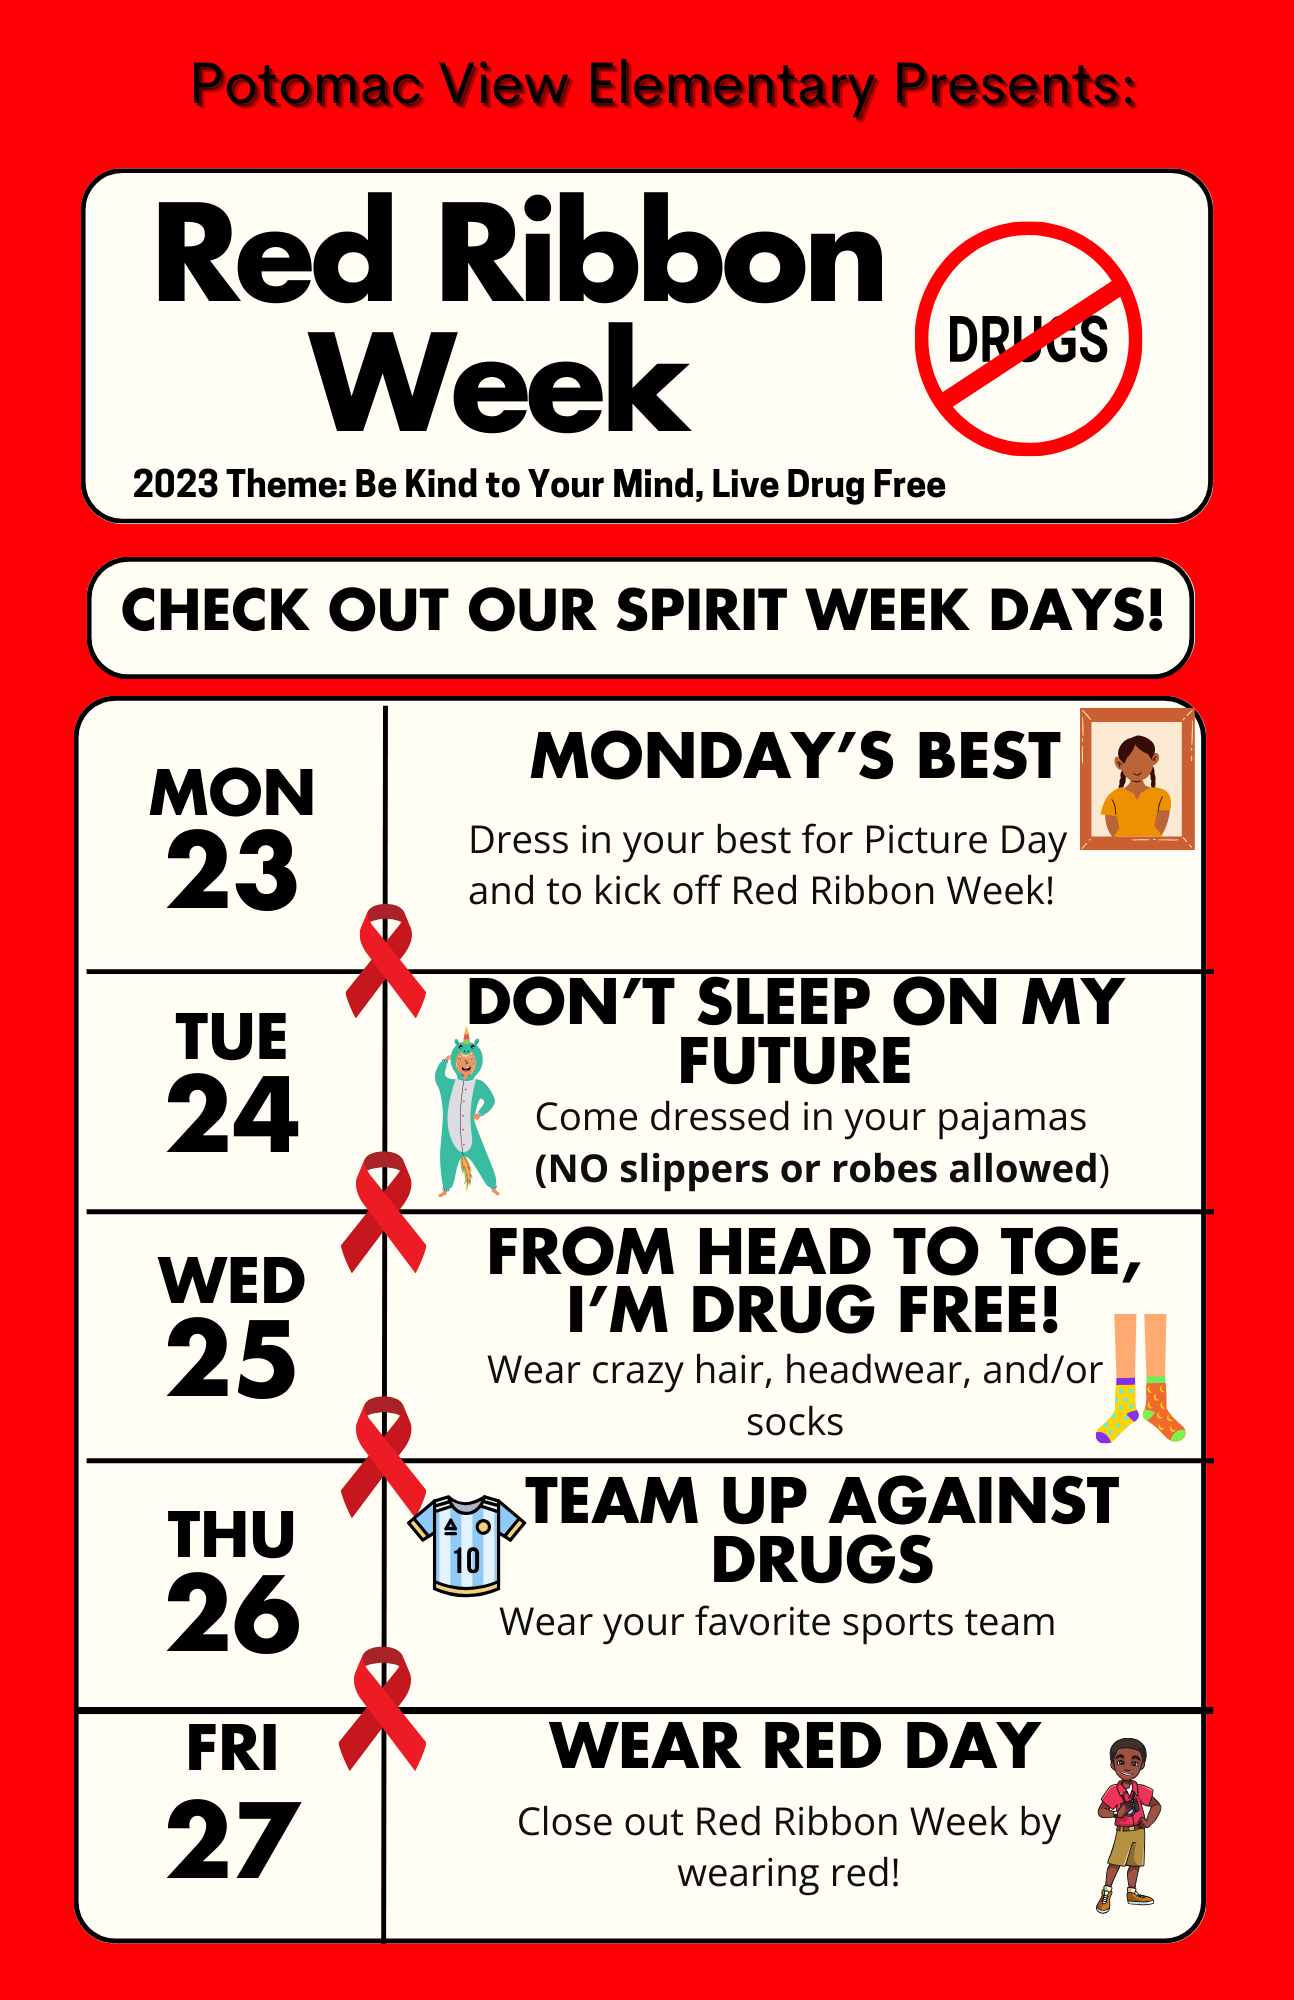 Red Ribbon Week National Theme: Be Kind to Your Mind, Live Drug Free  Monday, October 23rd -Monday's Best: Dress your best for picture day and to kick off Red Ribbon Week!   Tuesday, October 24th - Don't Sleep on My Future: Wear pajamas    Wednesday, October 25th -From Head to Toe, I’m Drug Free: Wear crazy hair, hats, or socks   Thursday, October 26th - Team Up Against Drugs: Wear your favorite sports team   Friday, October 27th -Wear Red Day 